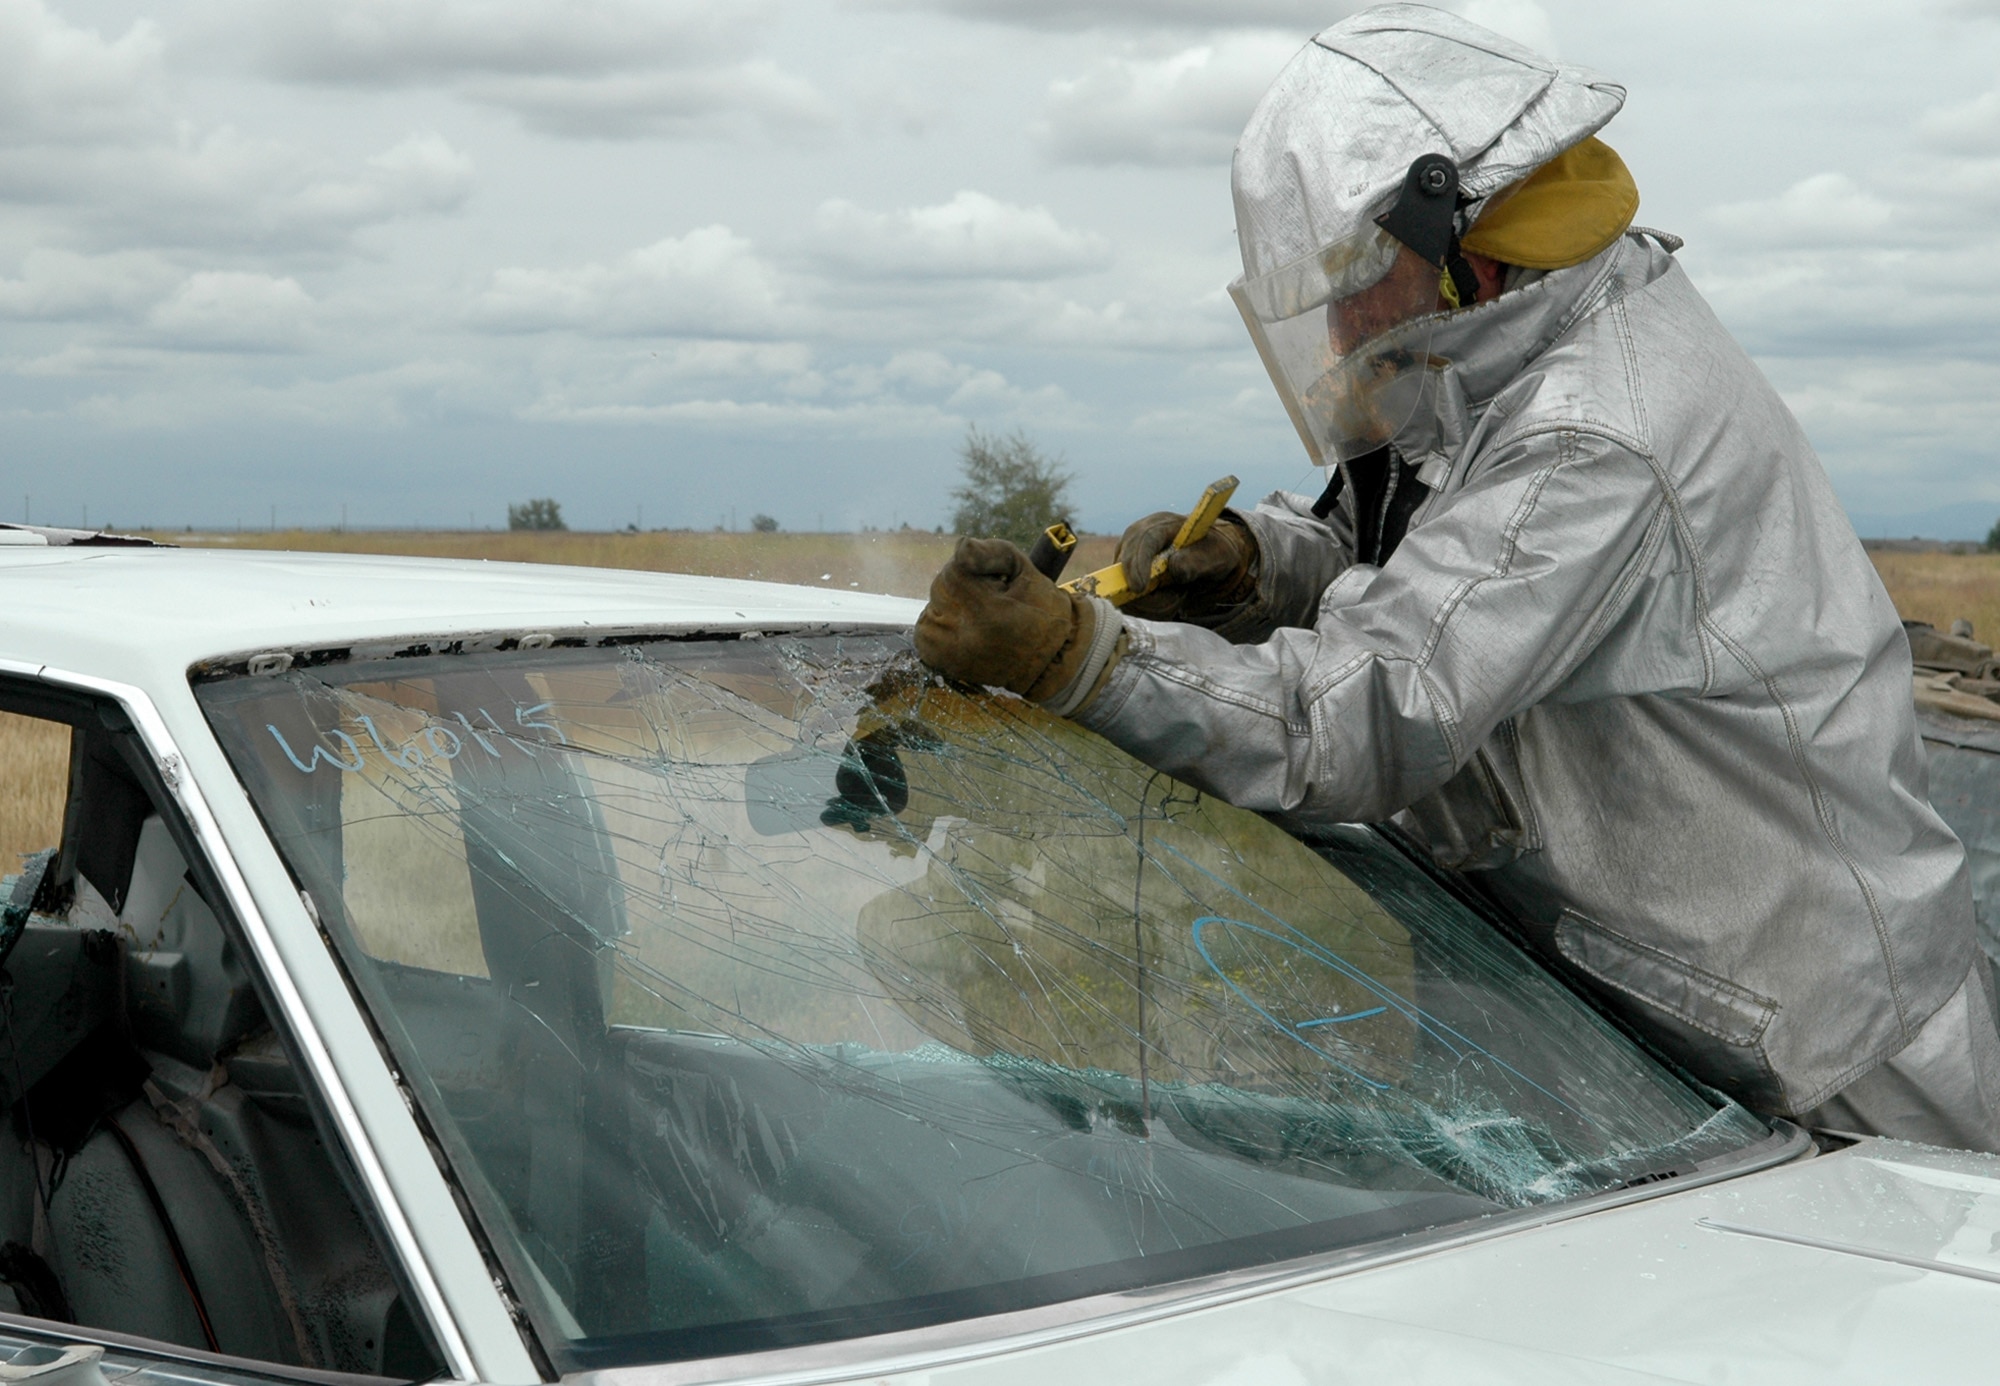 FAIRCHILD AIR FORCE BASE, Wash. – Thomas Morton, a 92nd Civil Engineer Squadron fire protection flight crew chief, uses a glass master tool to cut out the windshield of car during training Aug. 20. The flight used training vehicles to practice the extrication of a victim in a motor vehicle accident. (U.S. Air Force photo / Airman 1st Class Kali L. Gradishar)